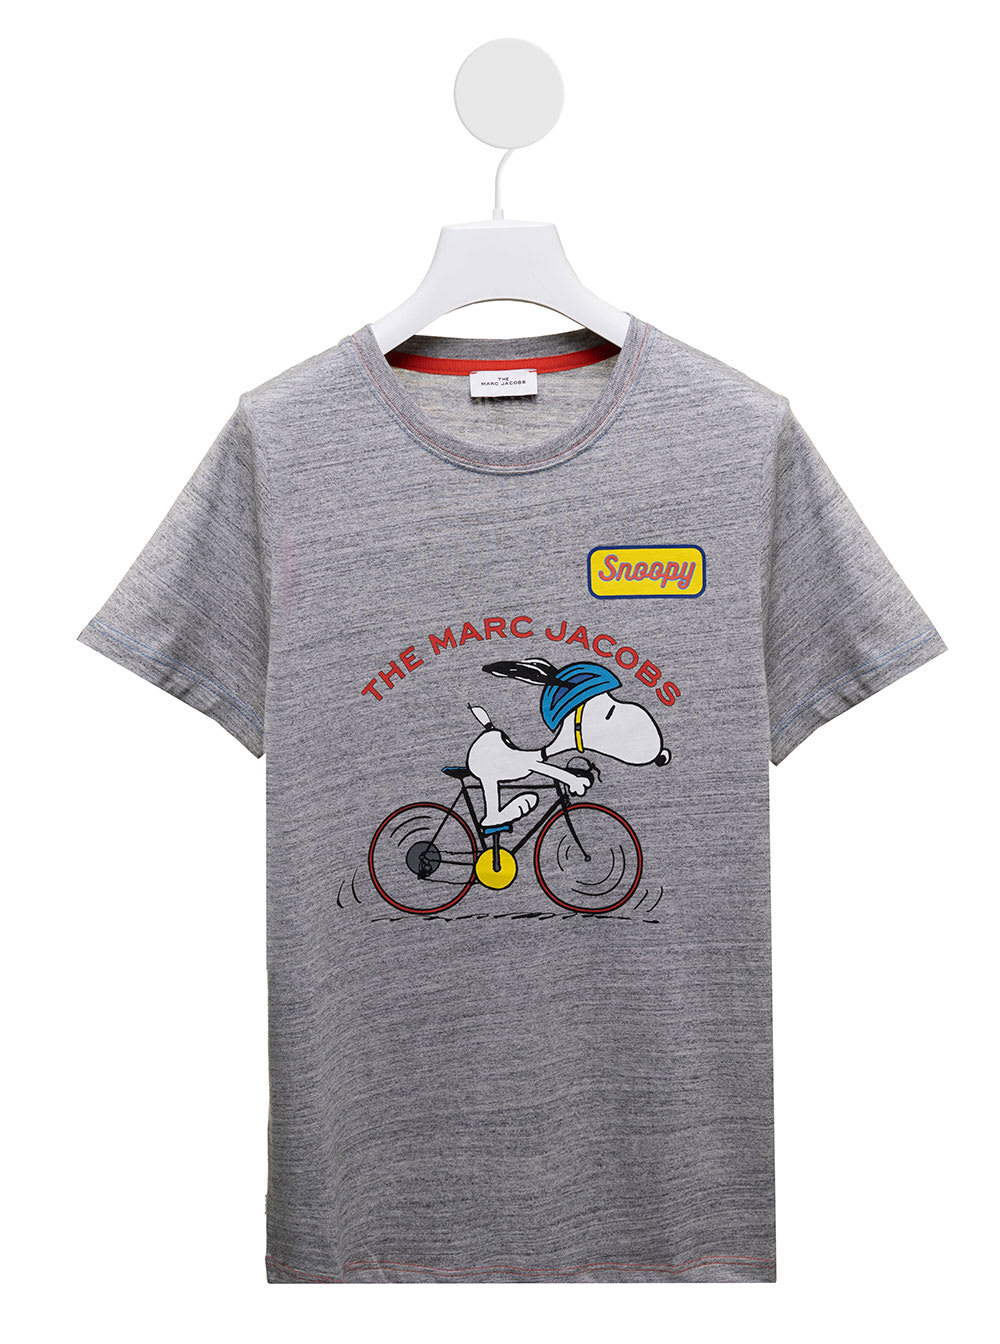 Marc Jacobs Boys Grey Cotton T-shirt With Snoopy Print